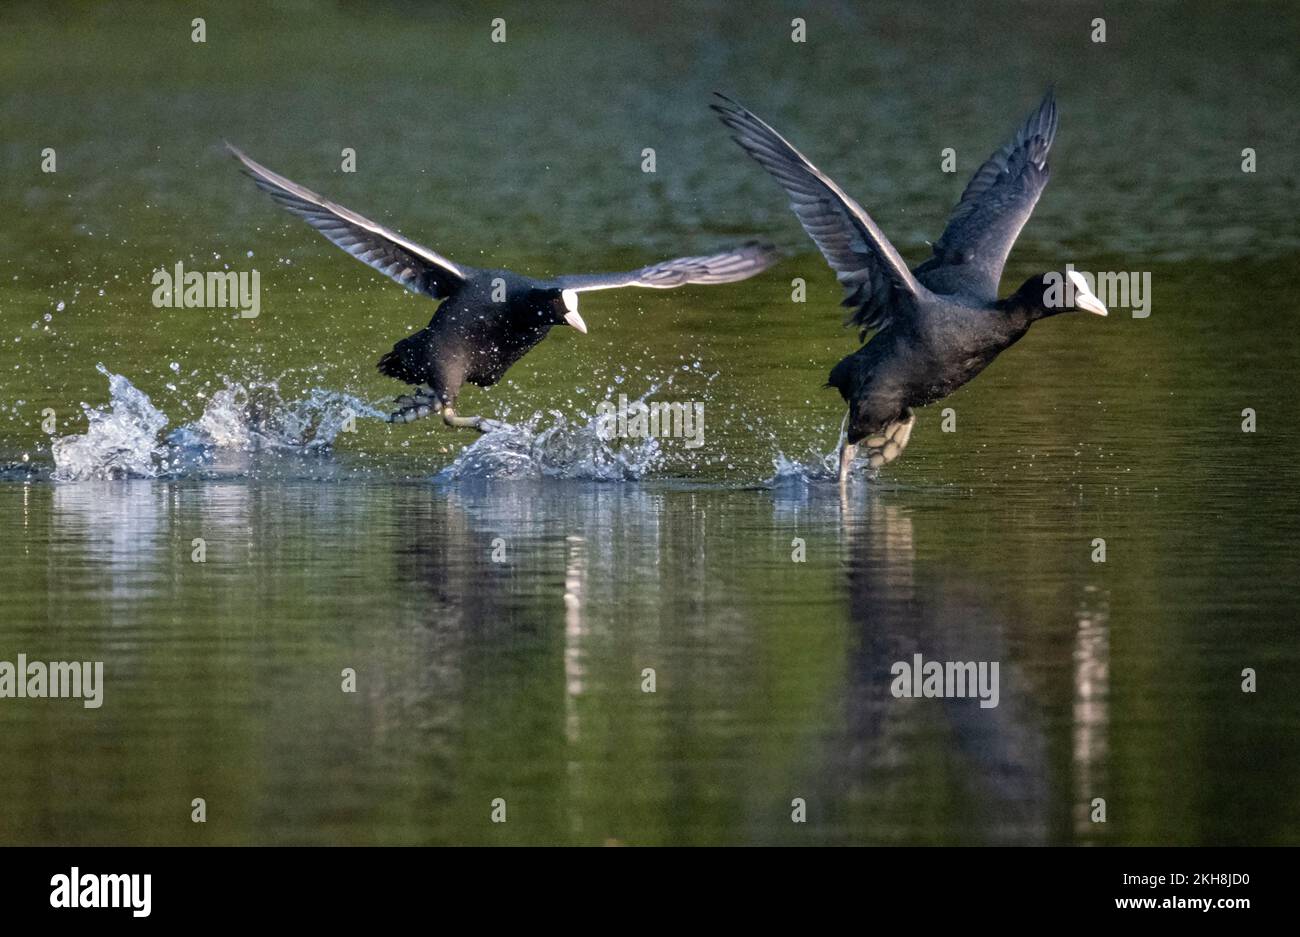 Coots (Fulica atra) running across the water and fighting, New Pool, Whitegate, Cheshire, England, UK Stock Photo